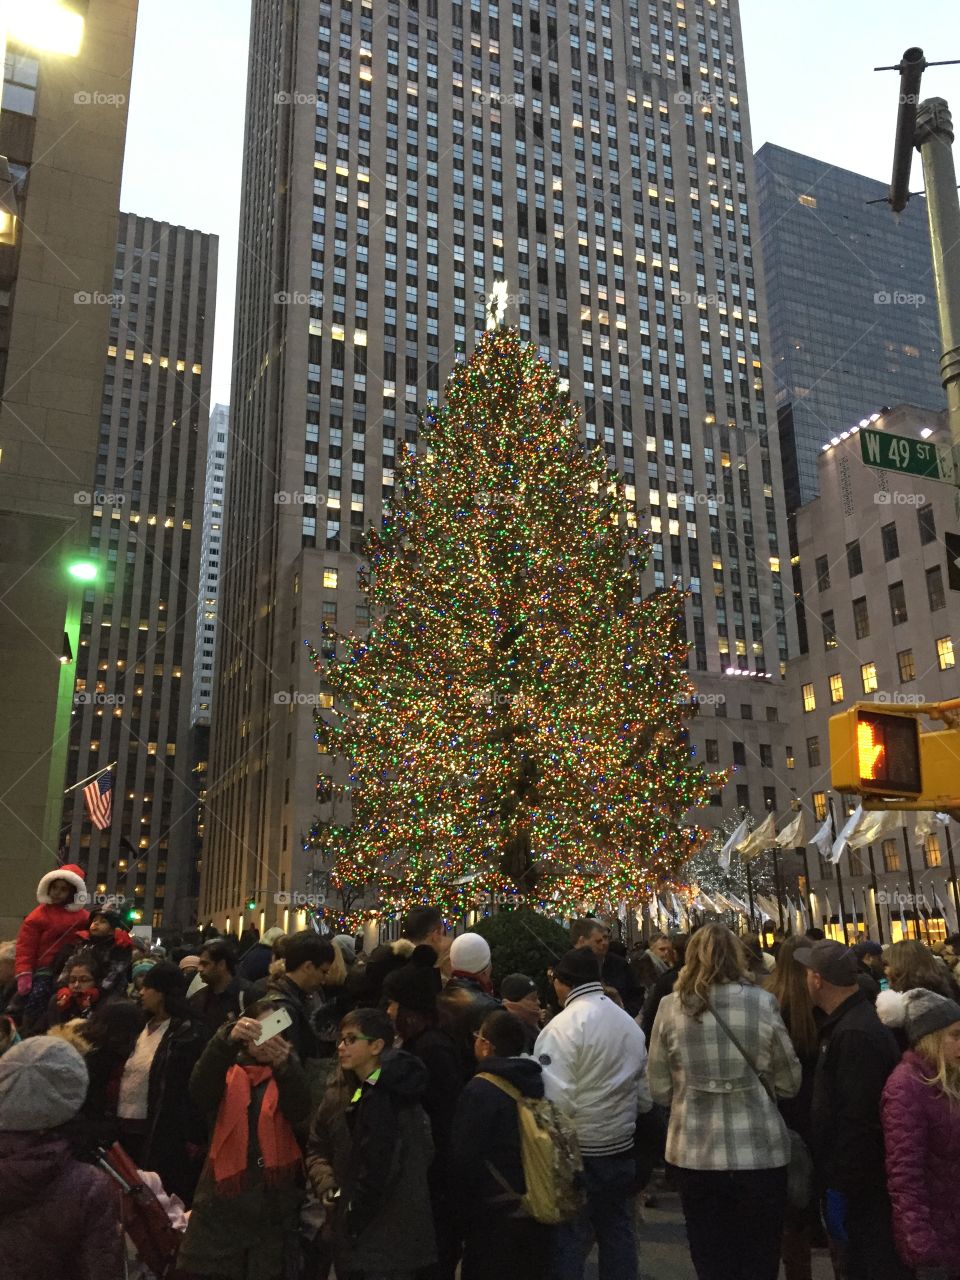 Beautifully designed Christmas tree at Rockefeller Center in NYC